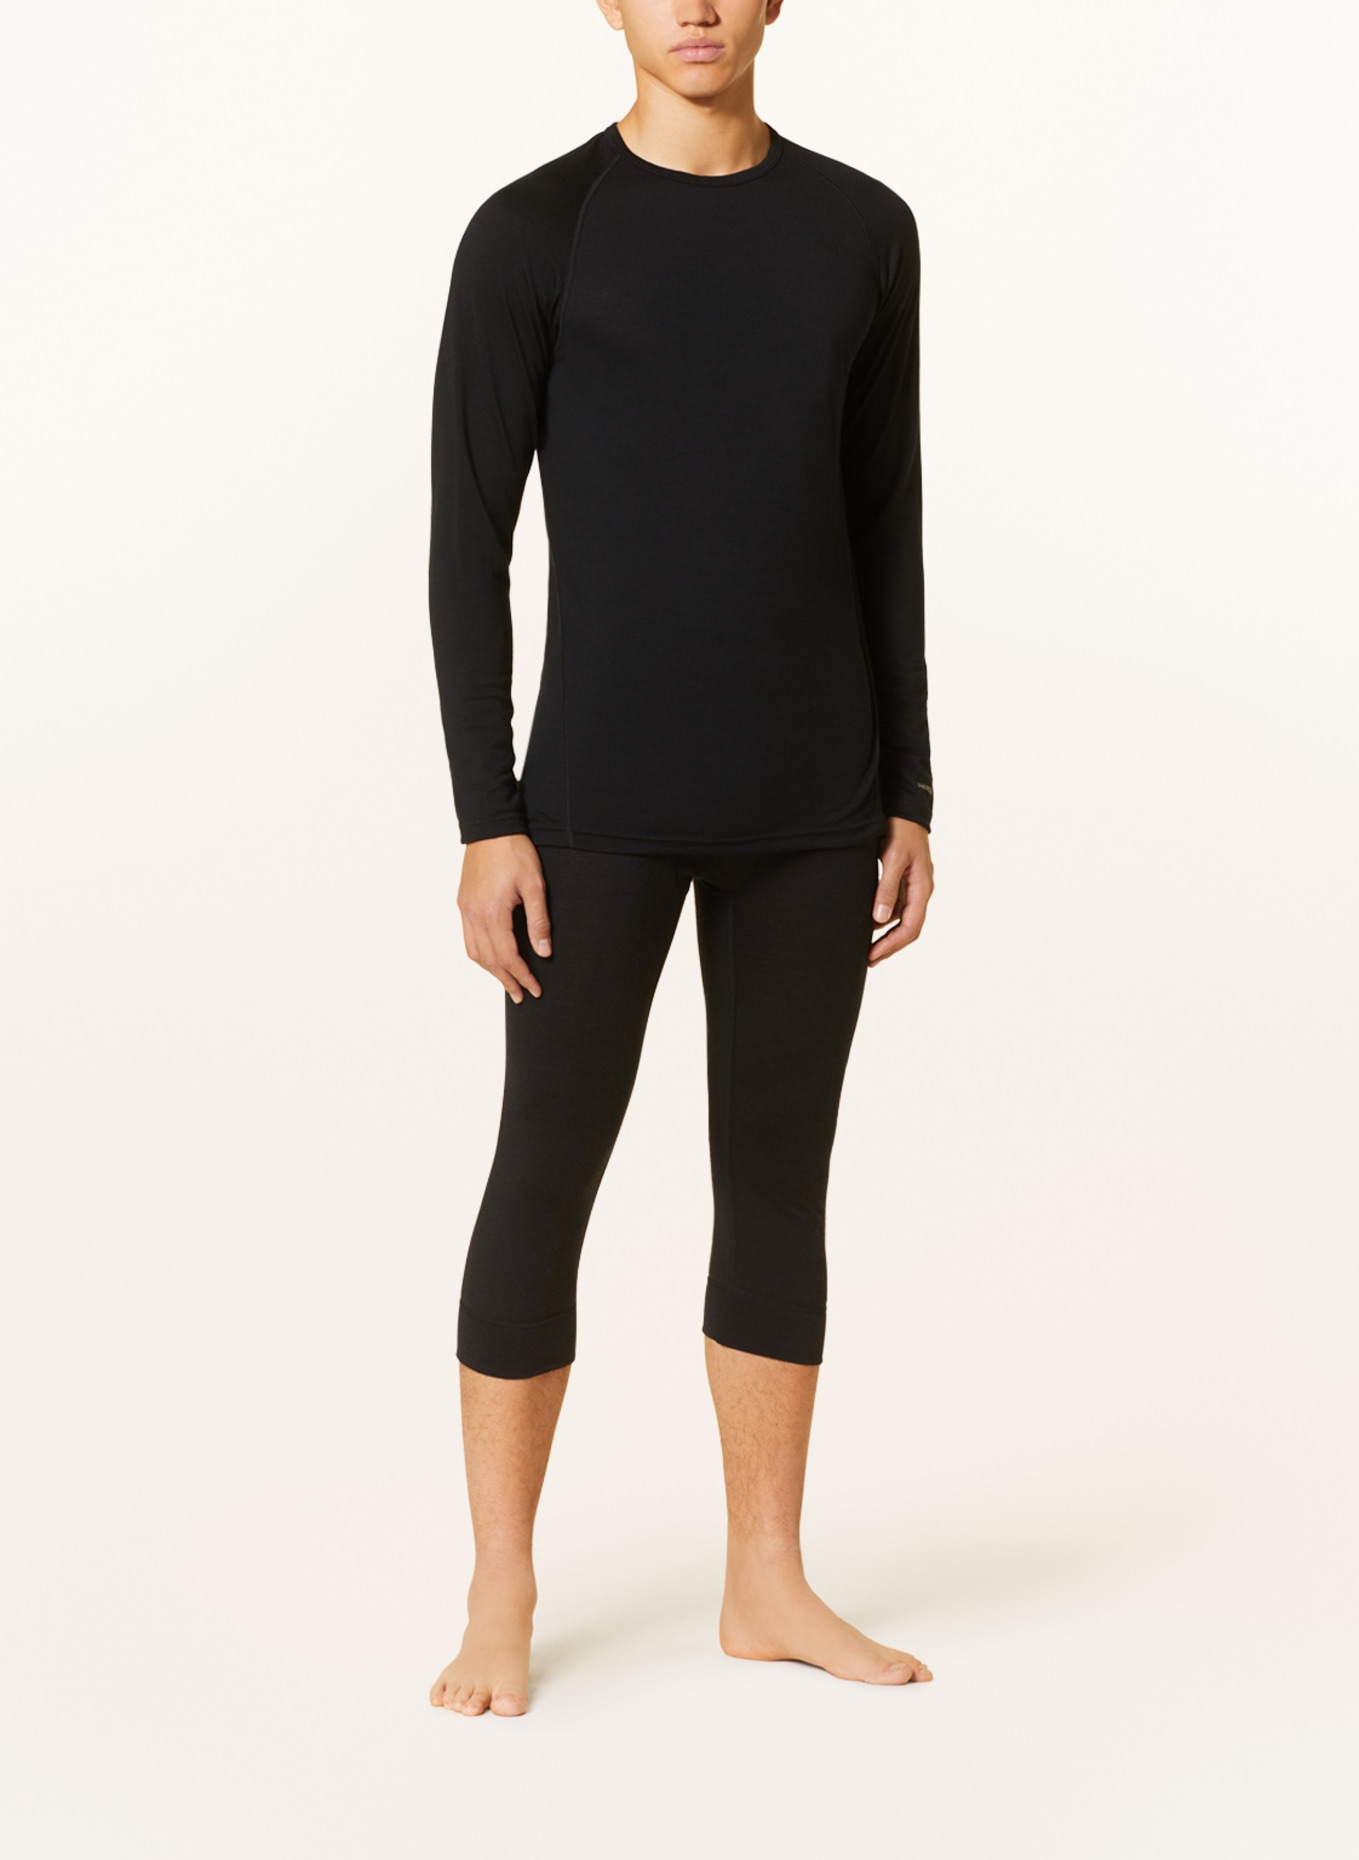 DEVOLD Functional underwear pants JAKTA in merino wool and with cropped leg length, Color: BLACK (Image 2)